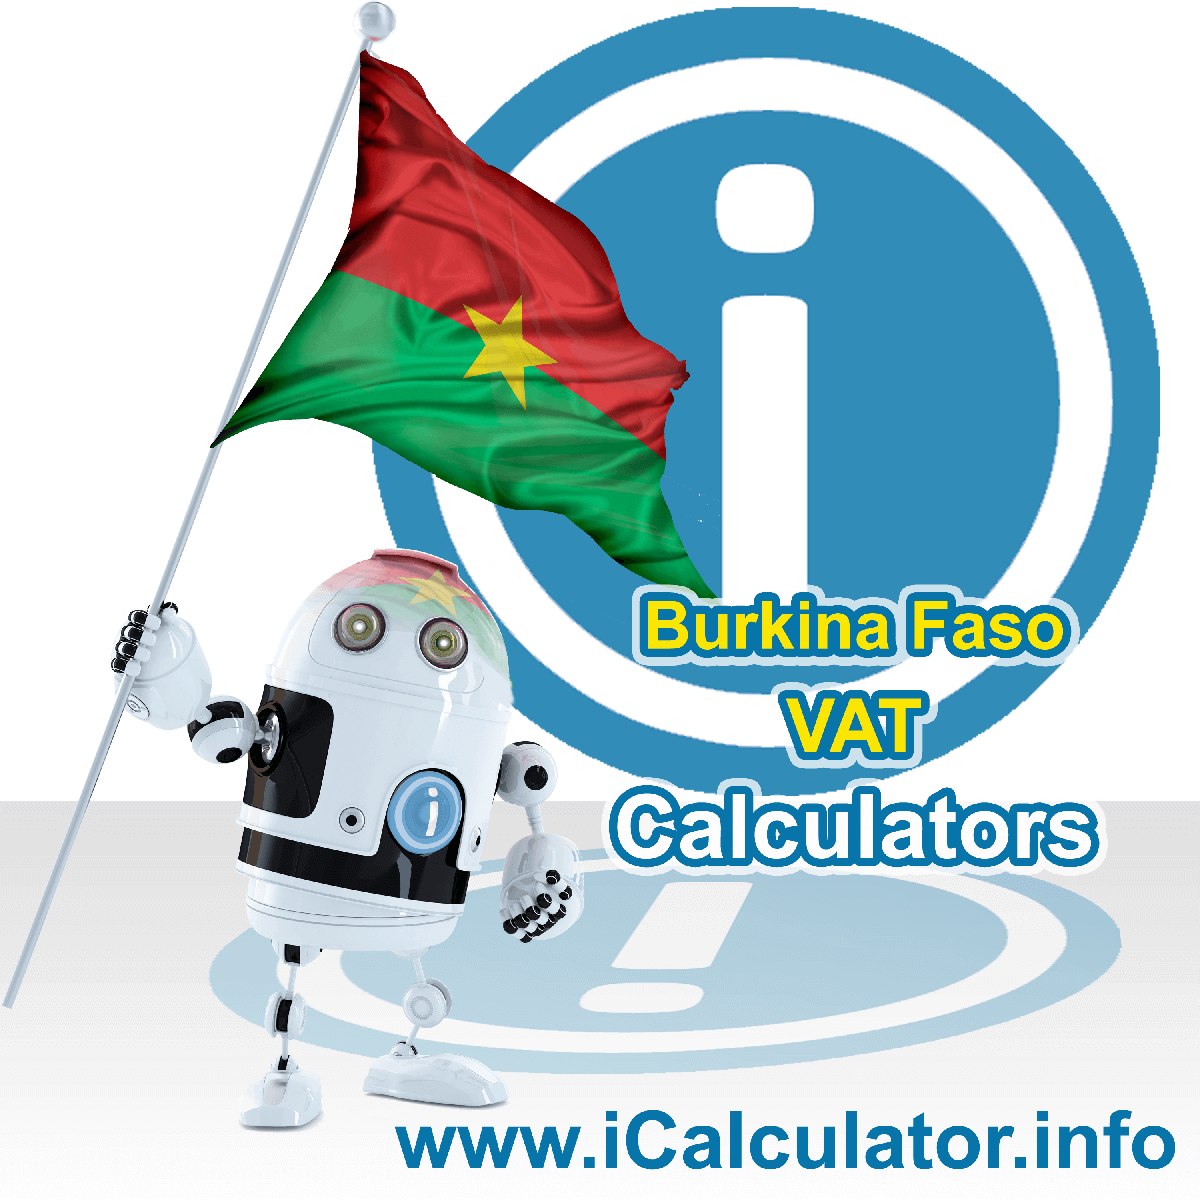 Burkina Faso VAT Calculator. This image shows the Burkina Faso flag and information relating to the VAT formula used for calculating Value Added Tax in Burkina Faso using the Burkina Faso VAT Calculator in 2023